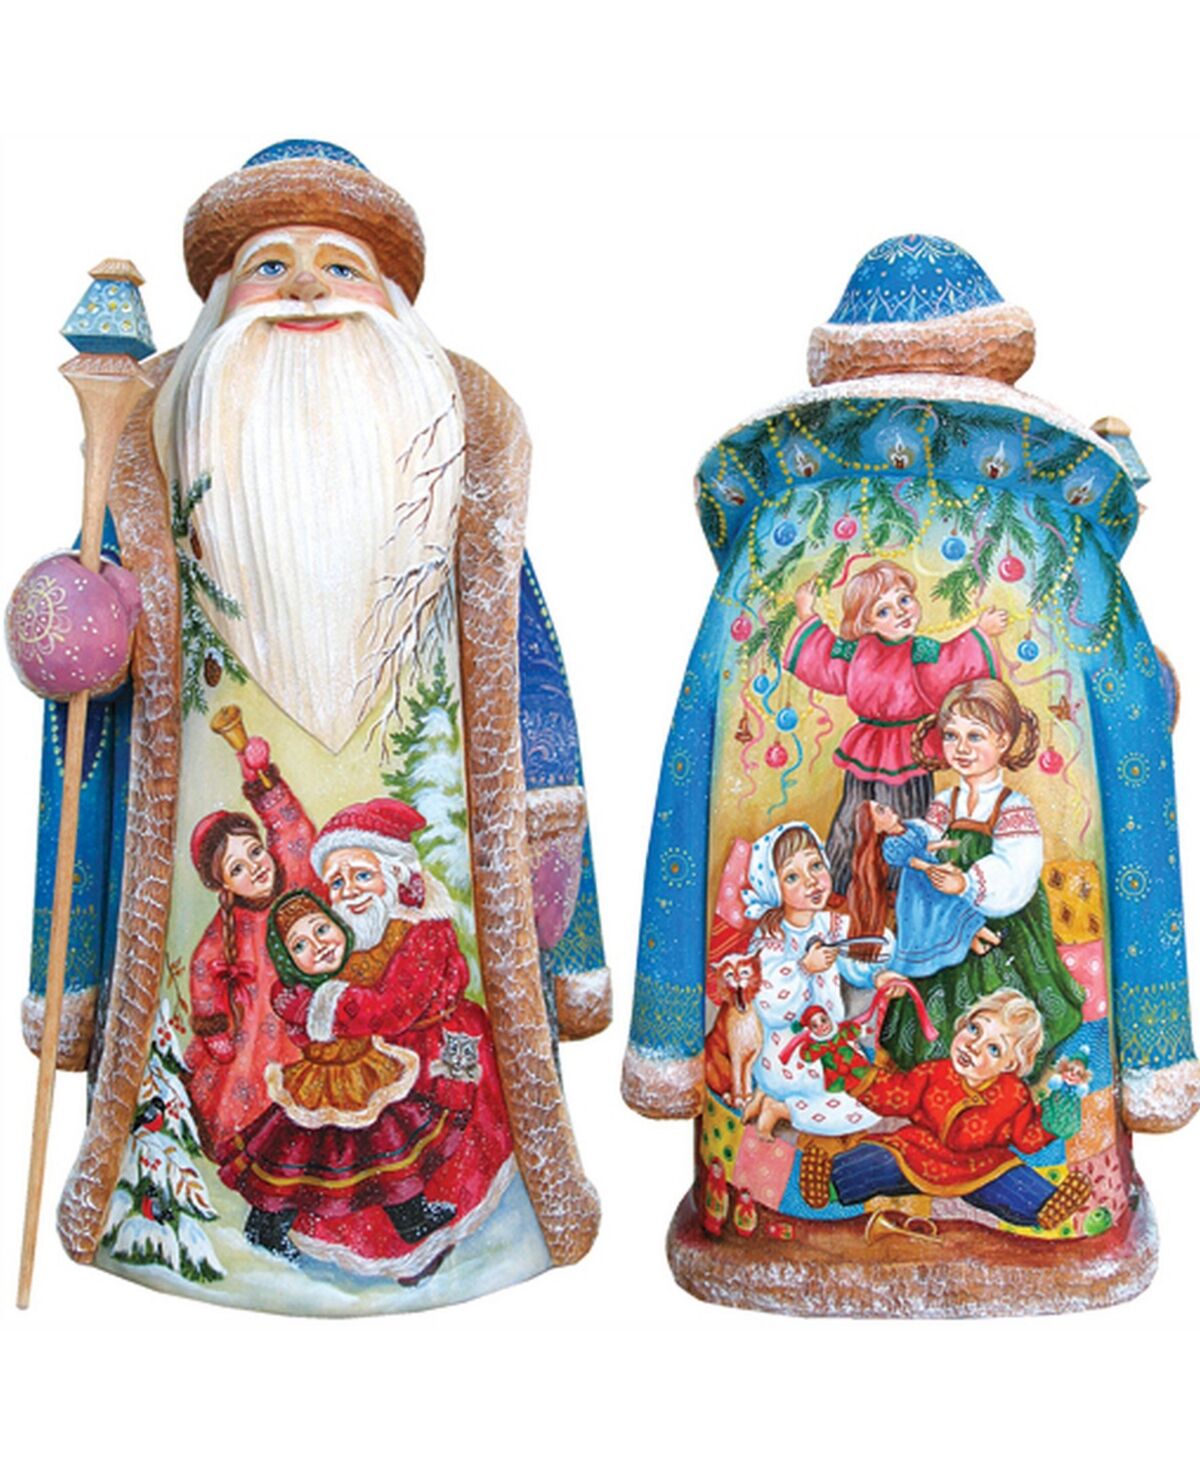 G.DeBrekht Woodcarved Hand Painted Christmas Ready Figurine - Multi